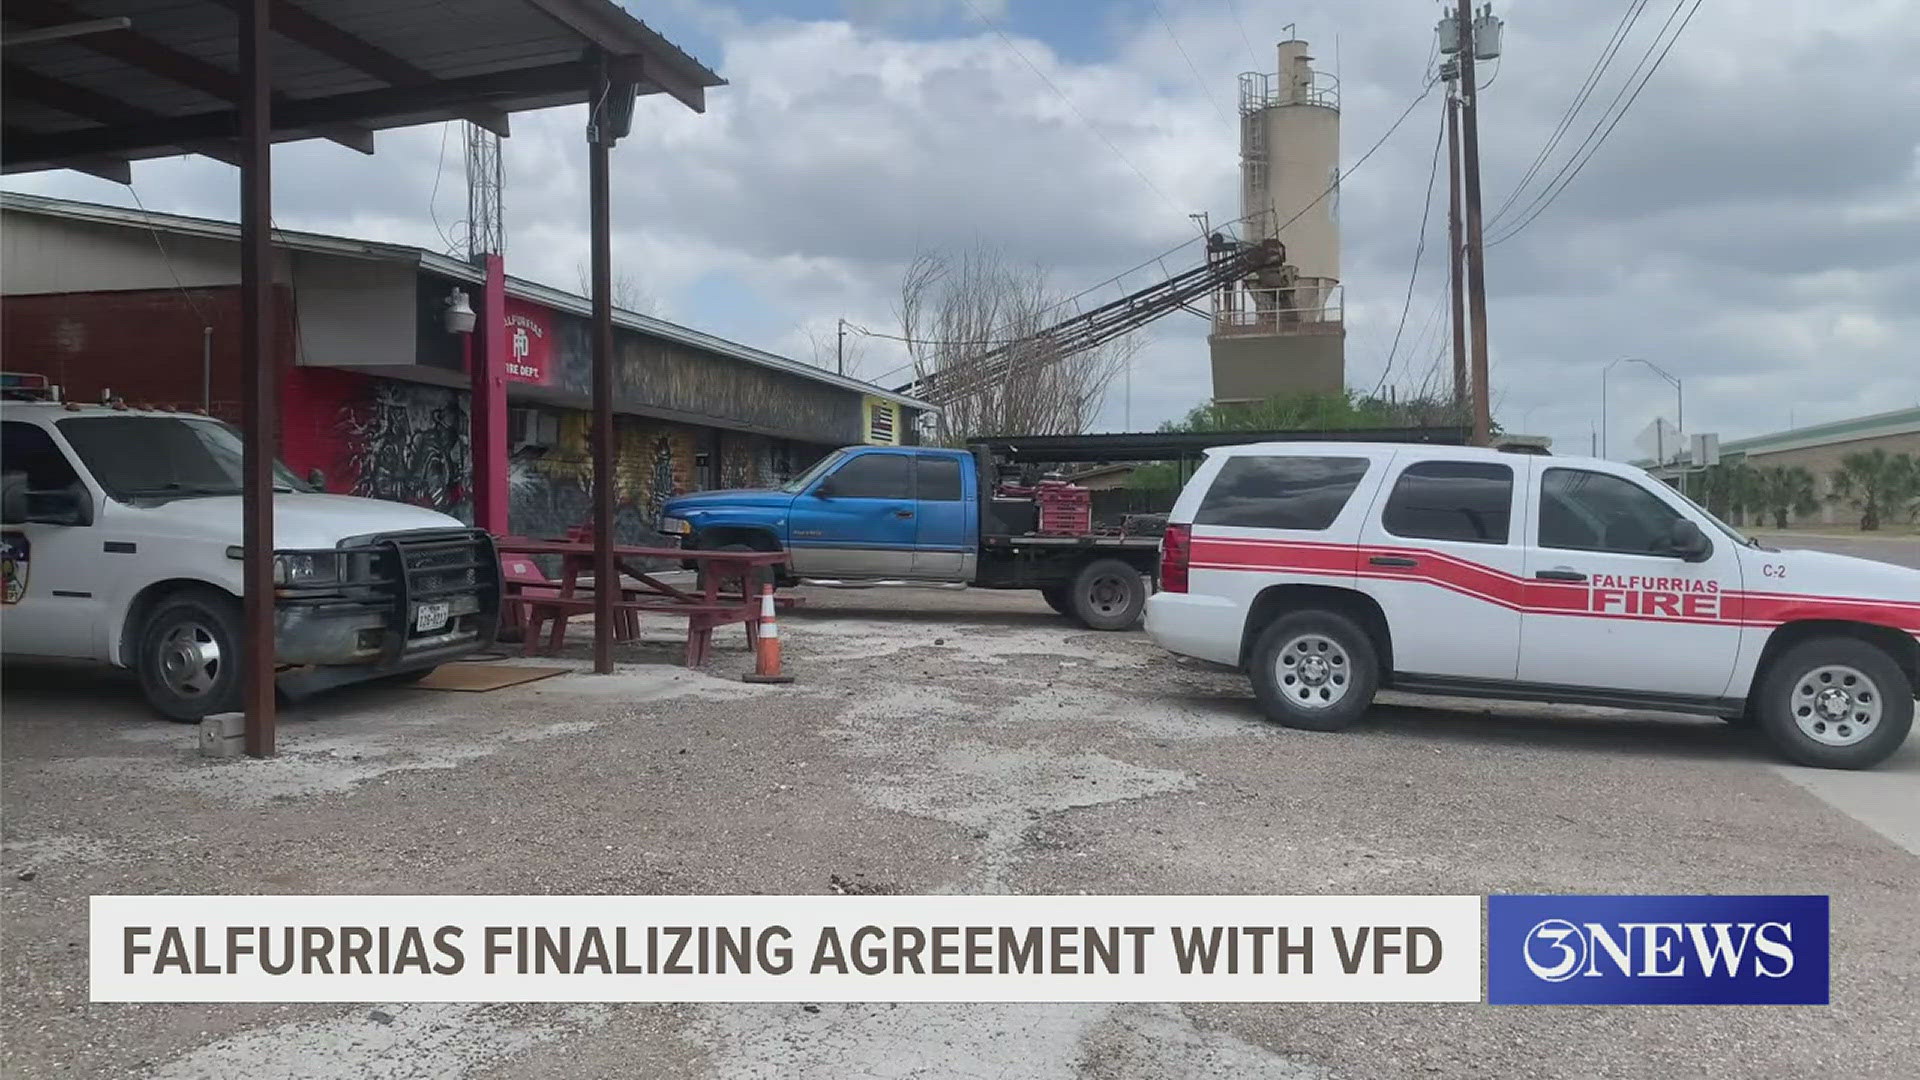 The goals of the legally binding deal are to ensure transparency and allow the VFD to better protect the community.